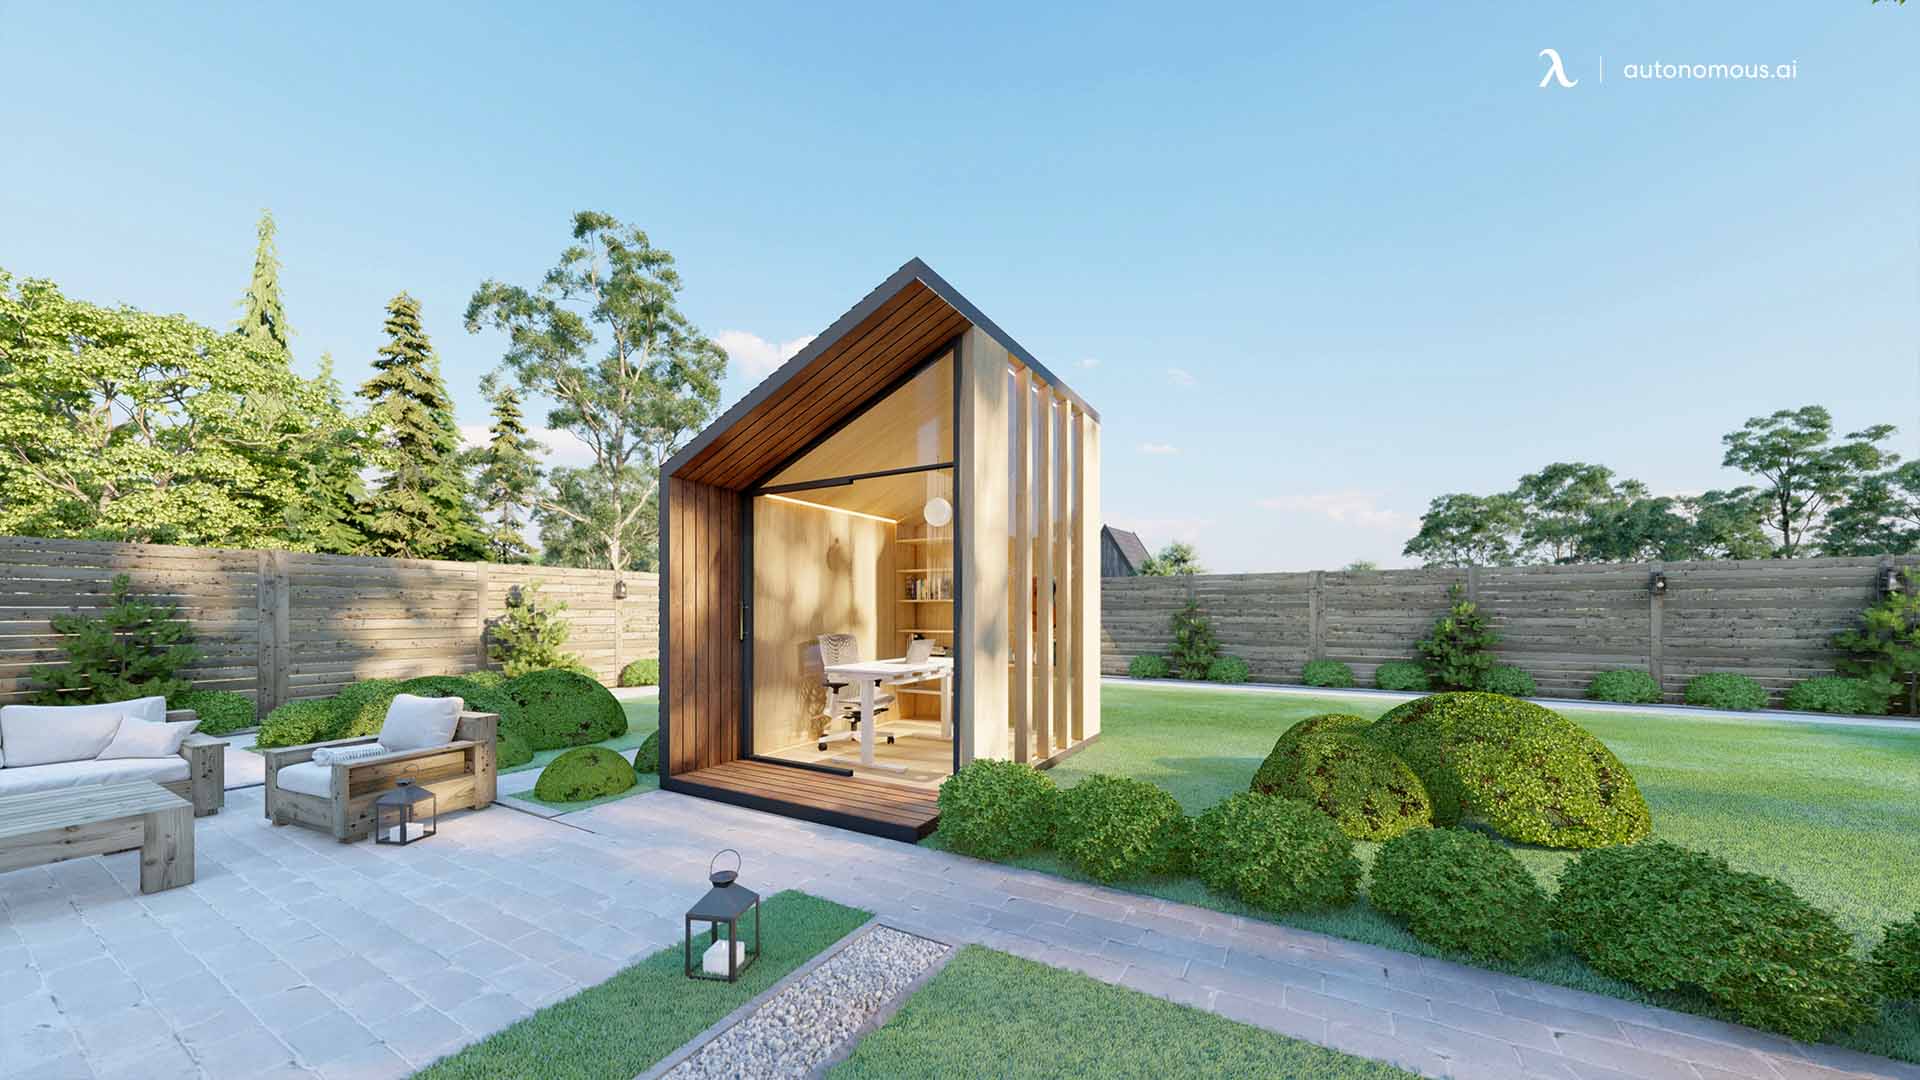 15 Prefab Office Pods to Setup Your Backyard Office in 2022